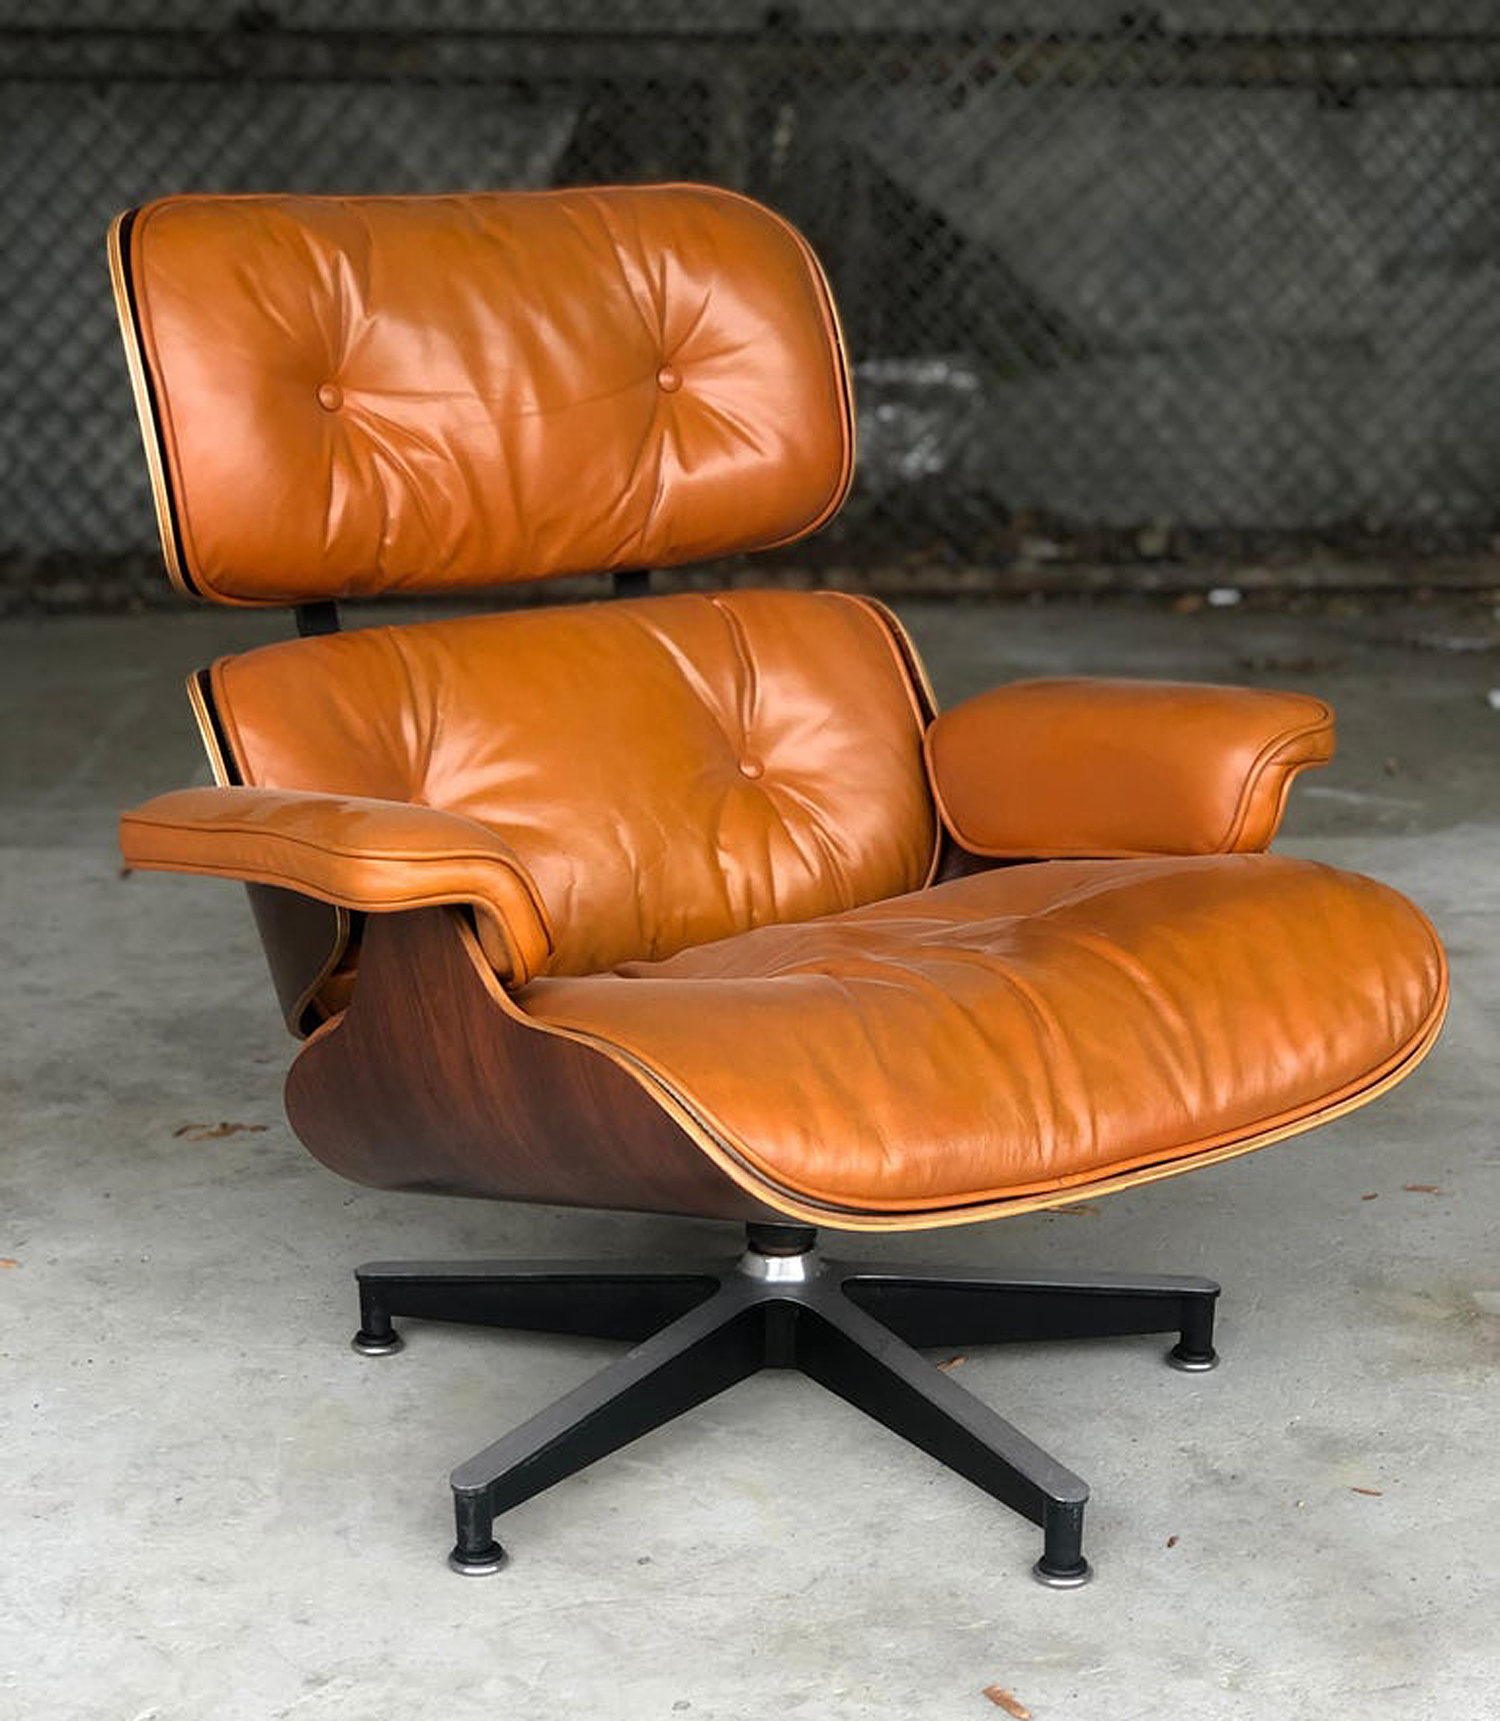 Kan weerstaan hypothese Versterker Vintage Eames Chairs Make a Handsome (and Sustainable) Christmas Gift -  InsideHook